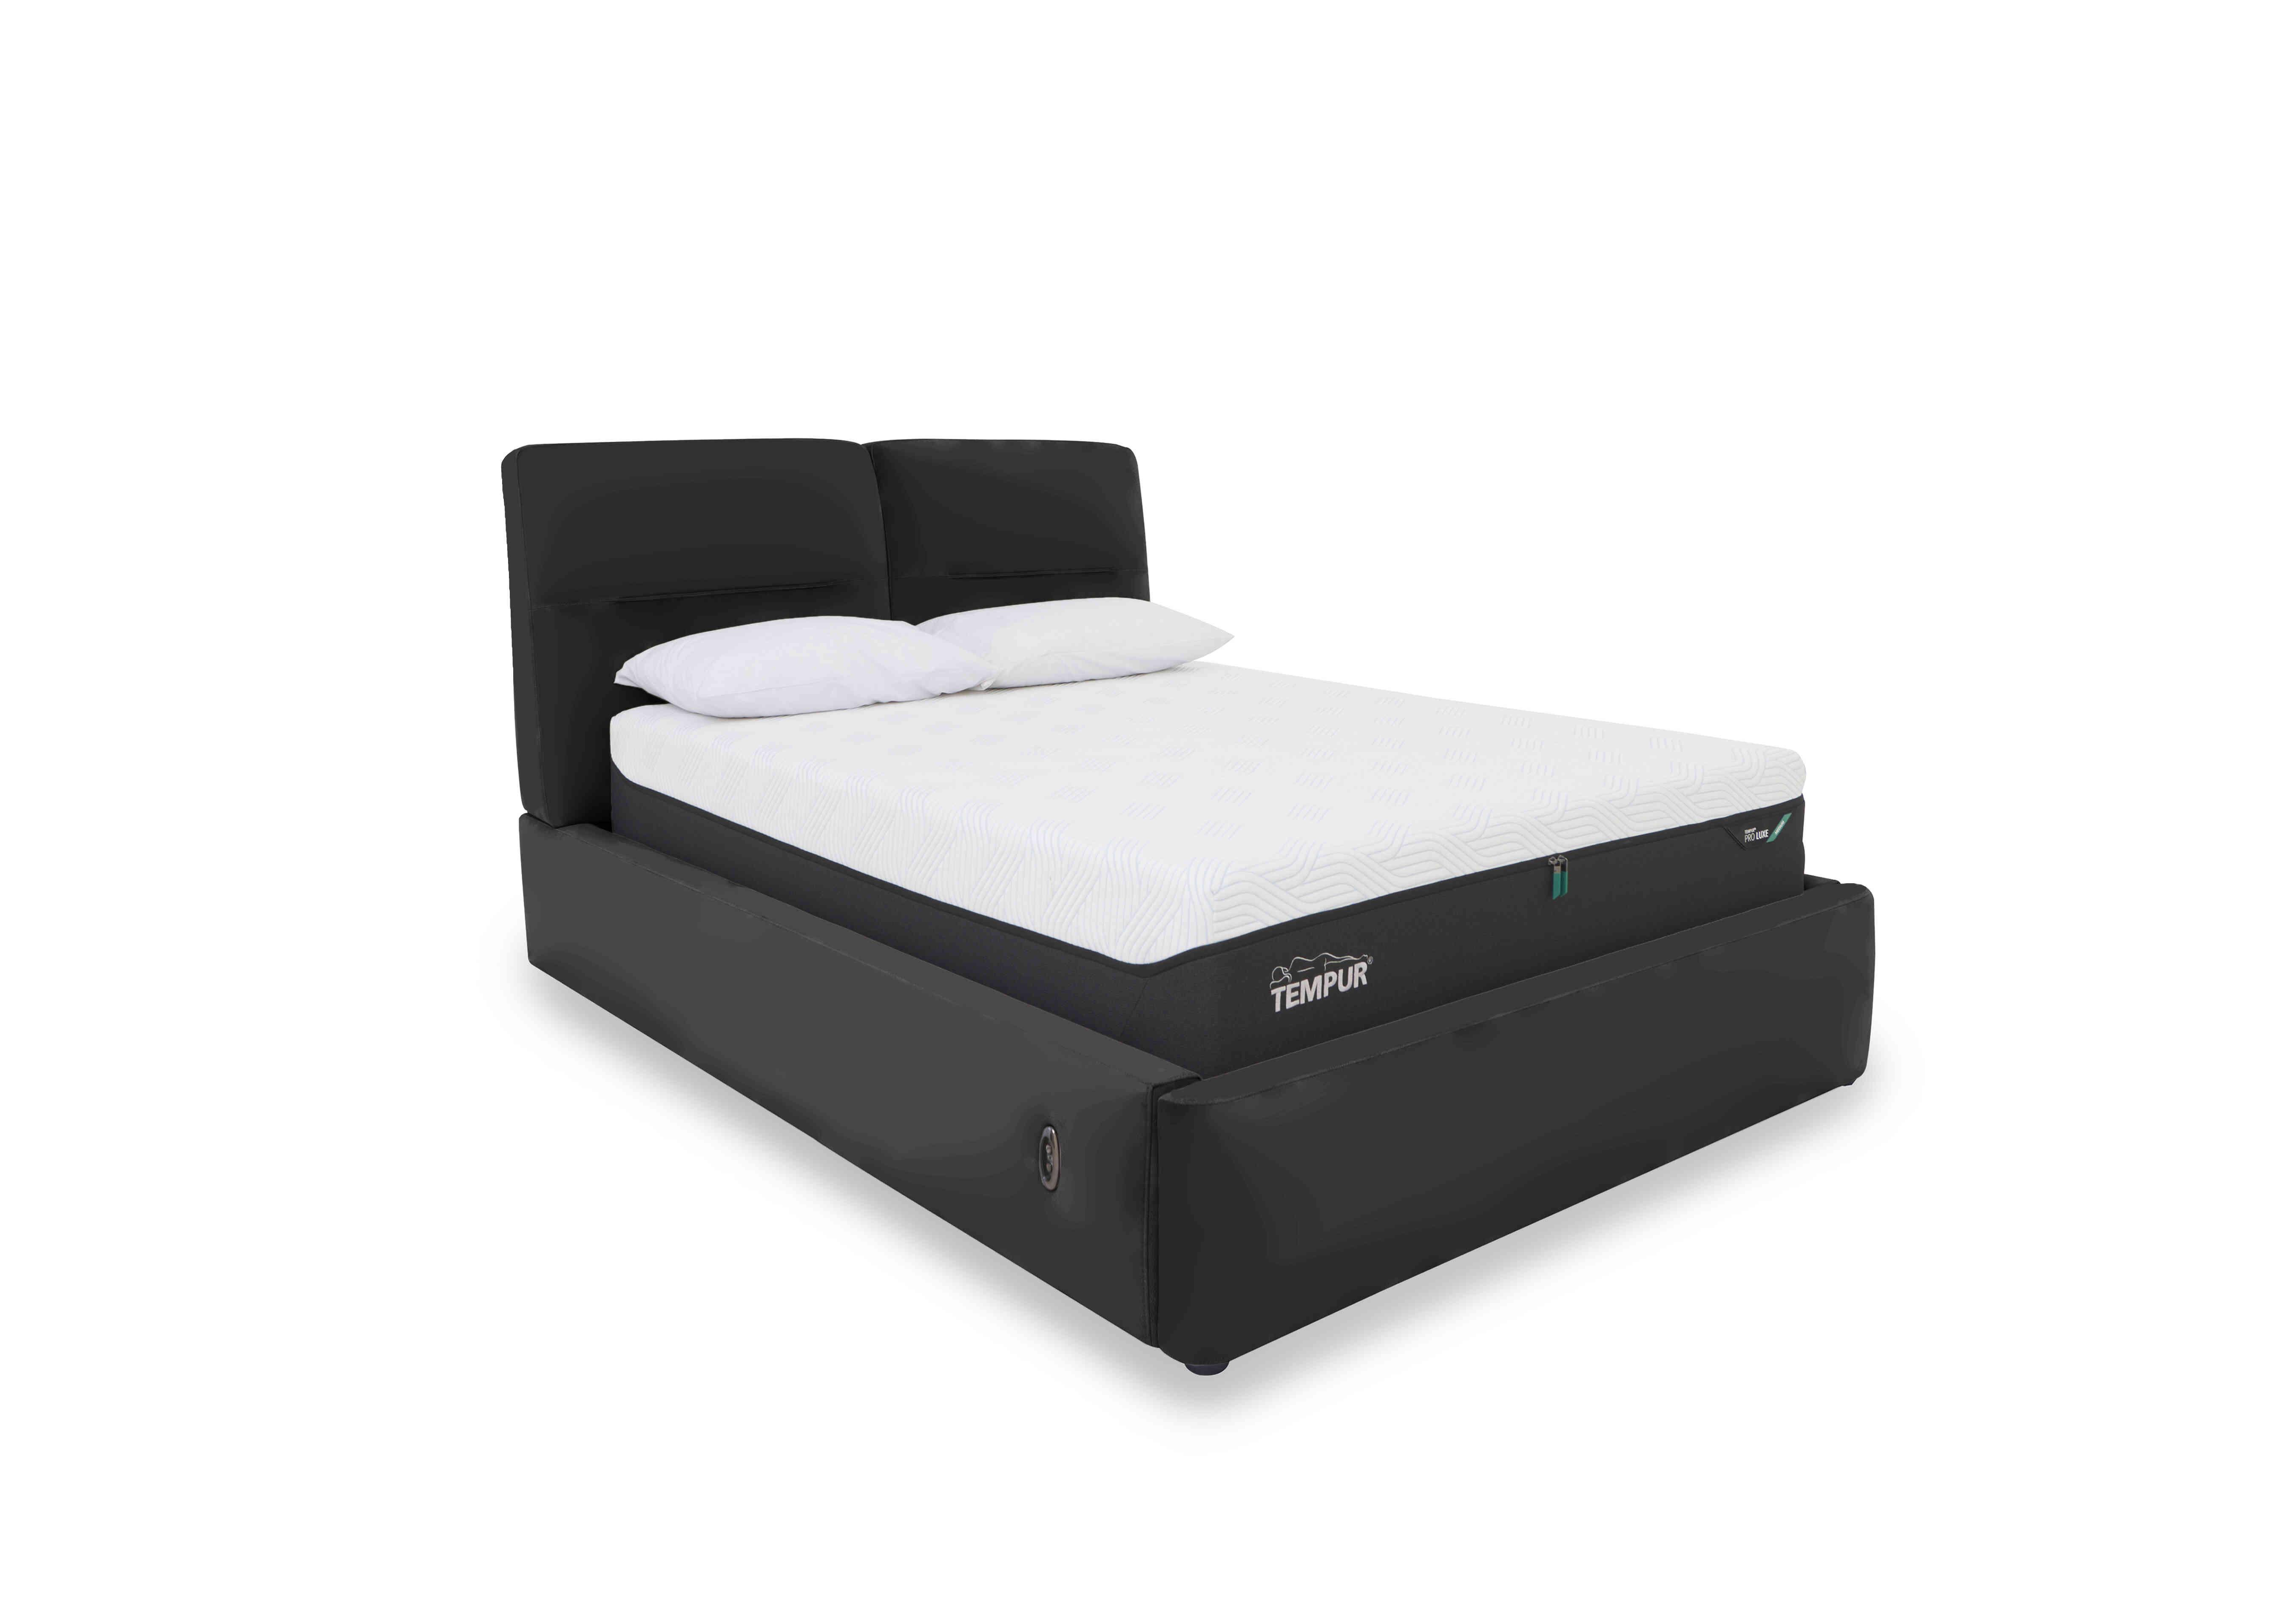 Stark Leather Electric Ottoman Bed Frame in Bv-3500 Classic Black on Furniture Village